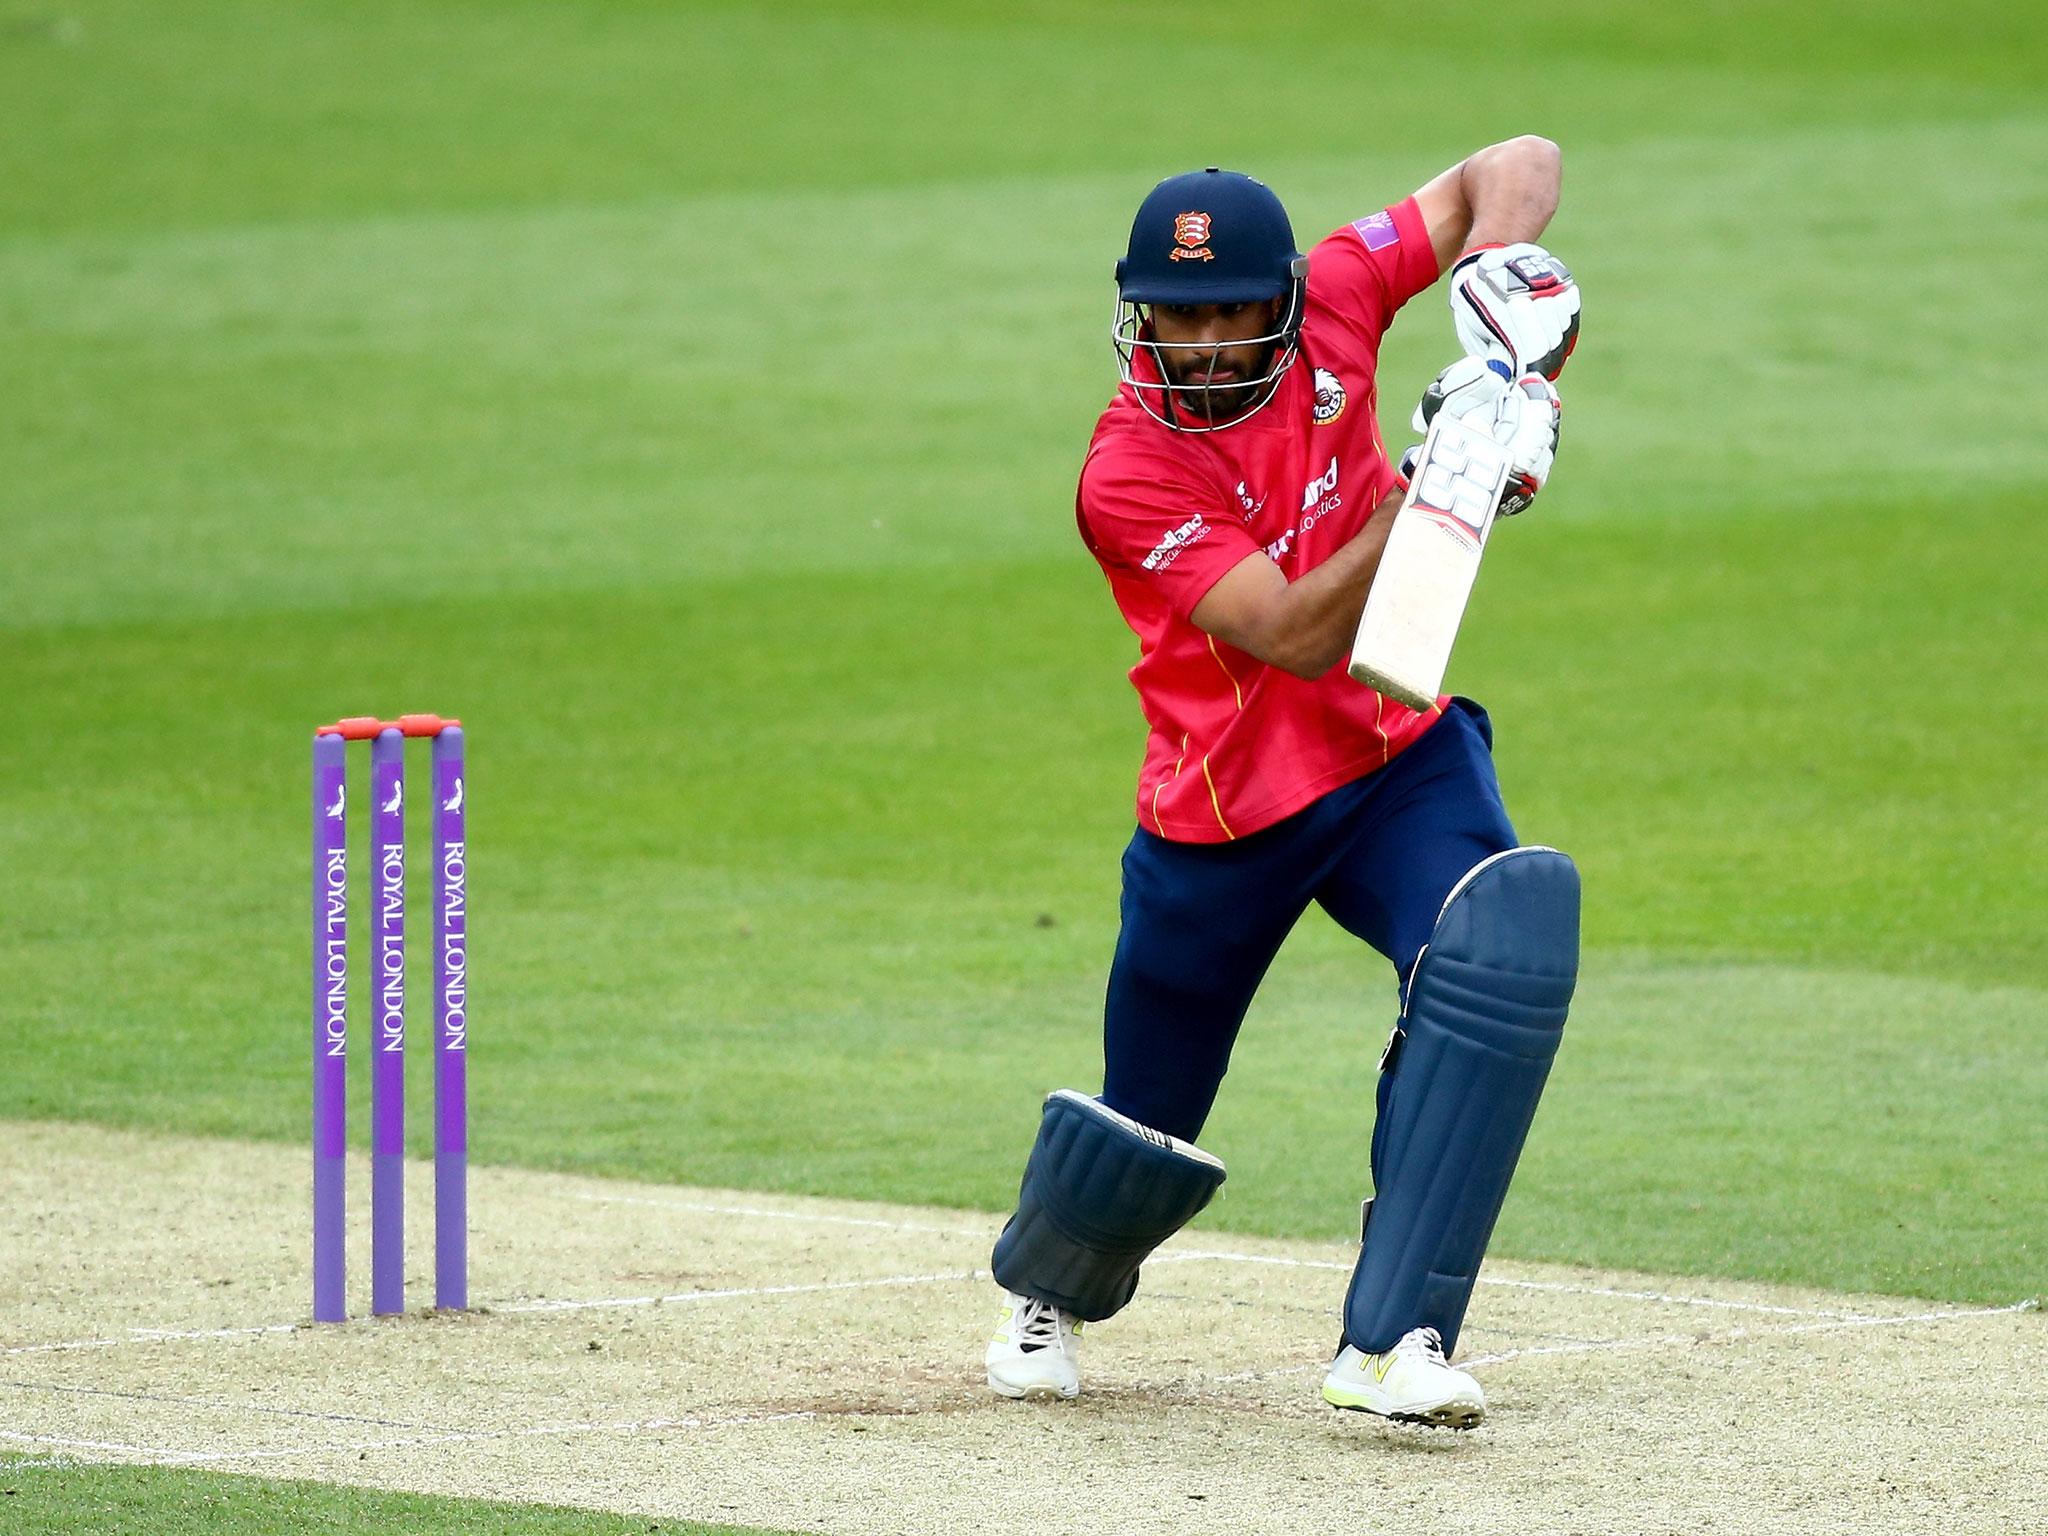 Essex in the driving seat against Hampshire at Chelmsford - The Independent